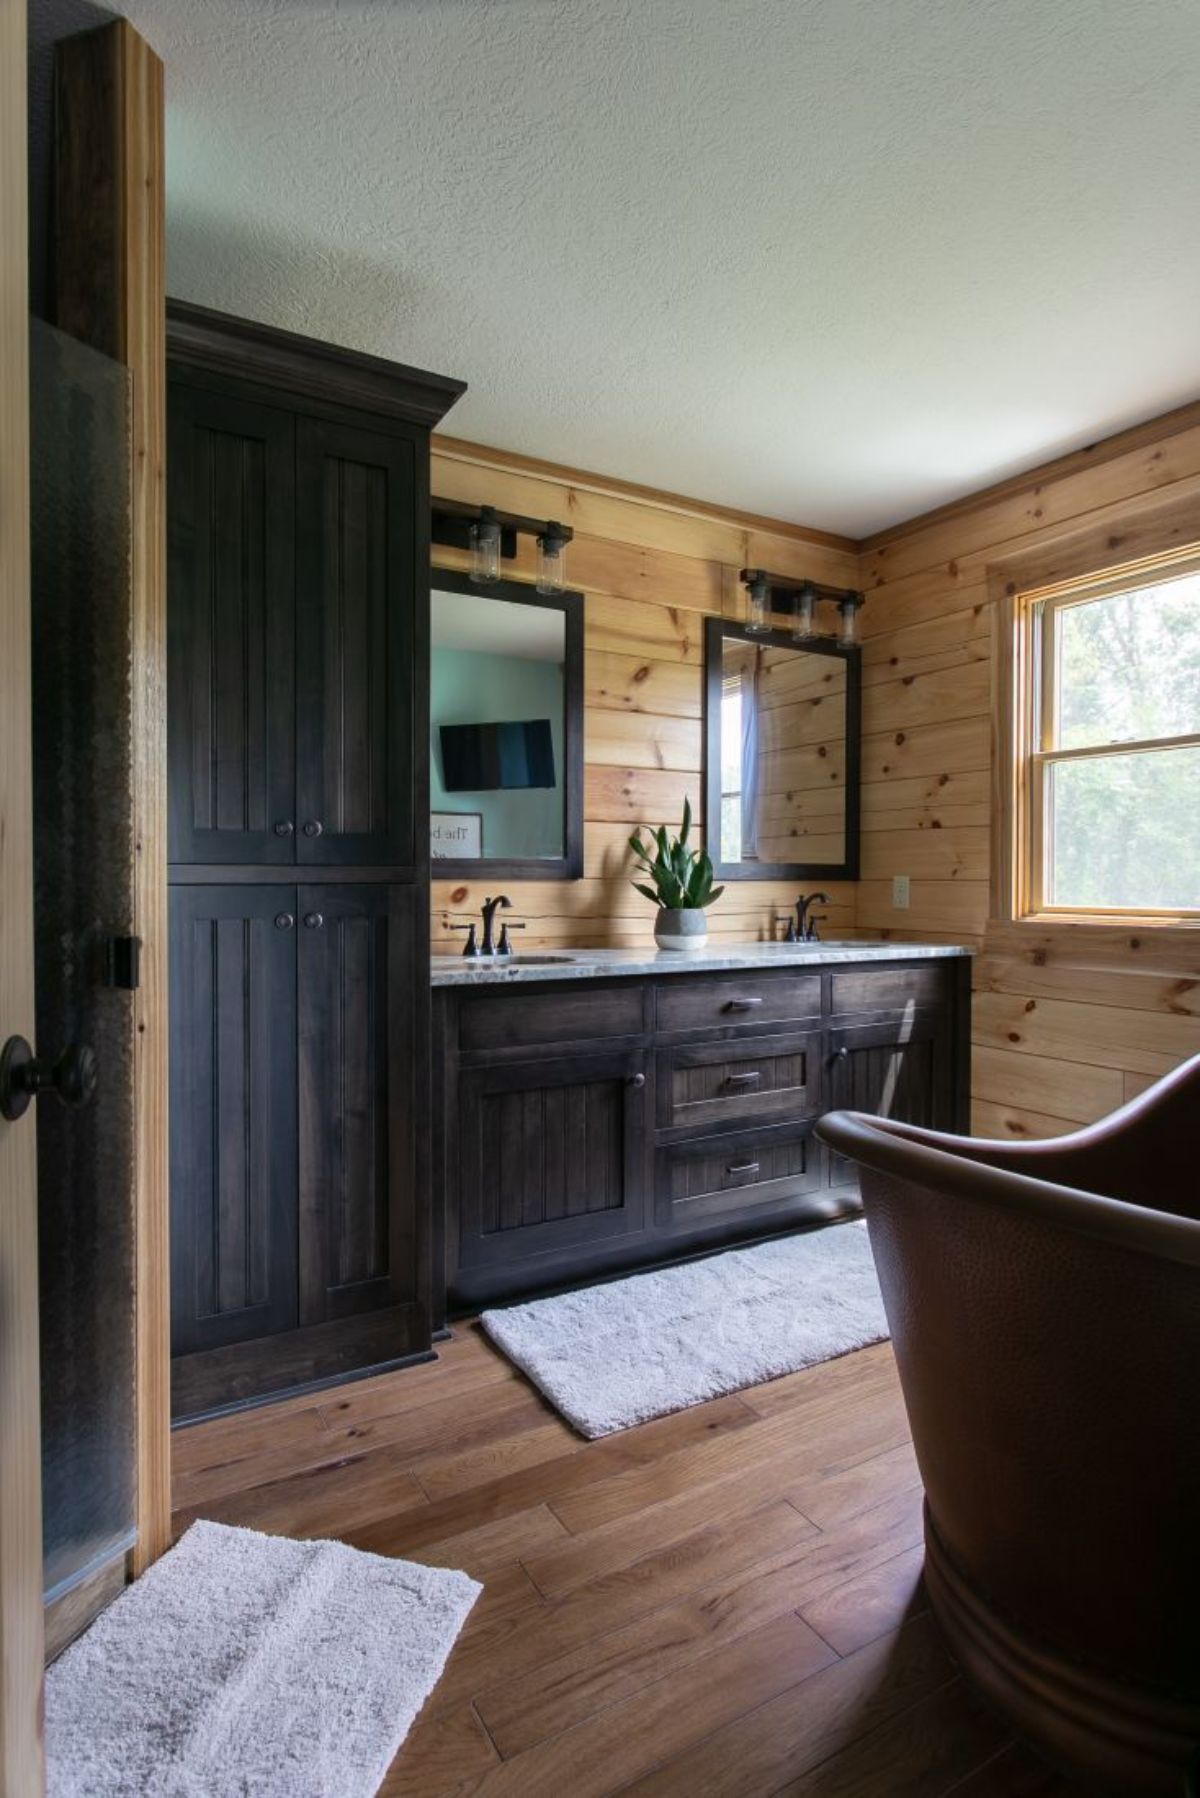 view into bathroom from door showing dark wood cabinets against left wall